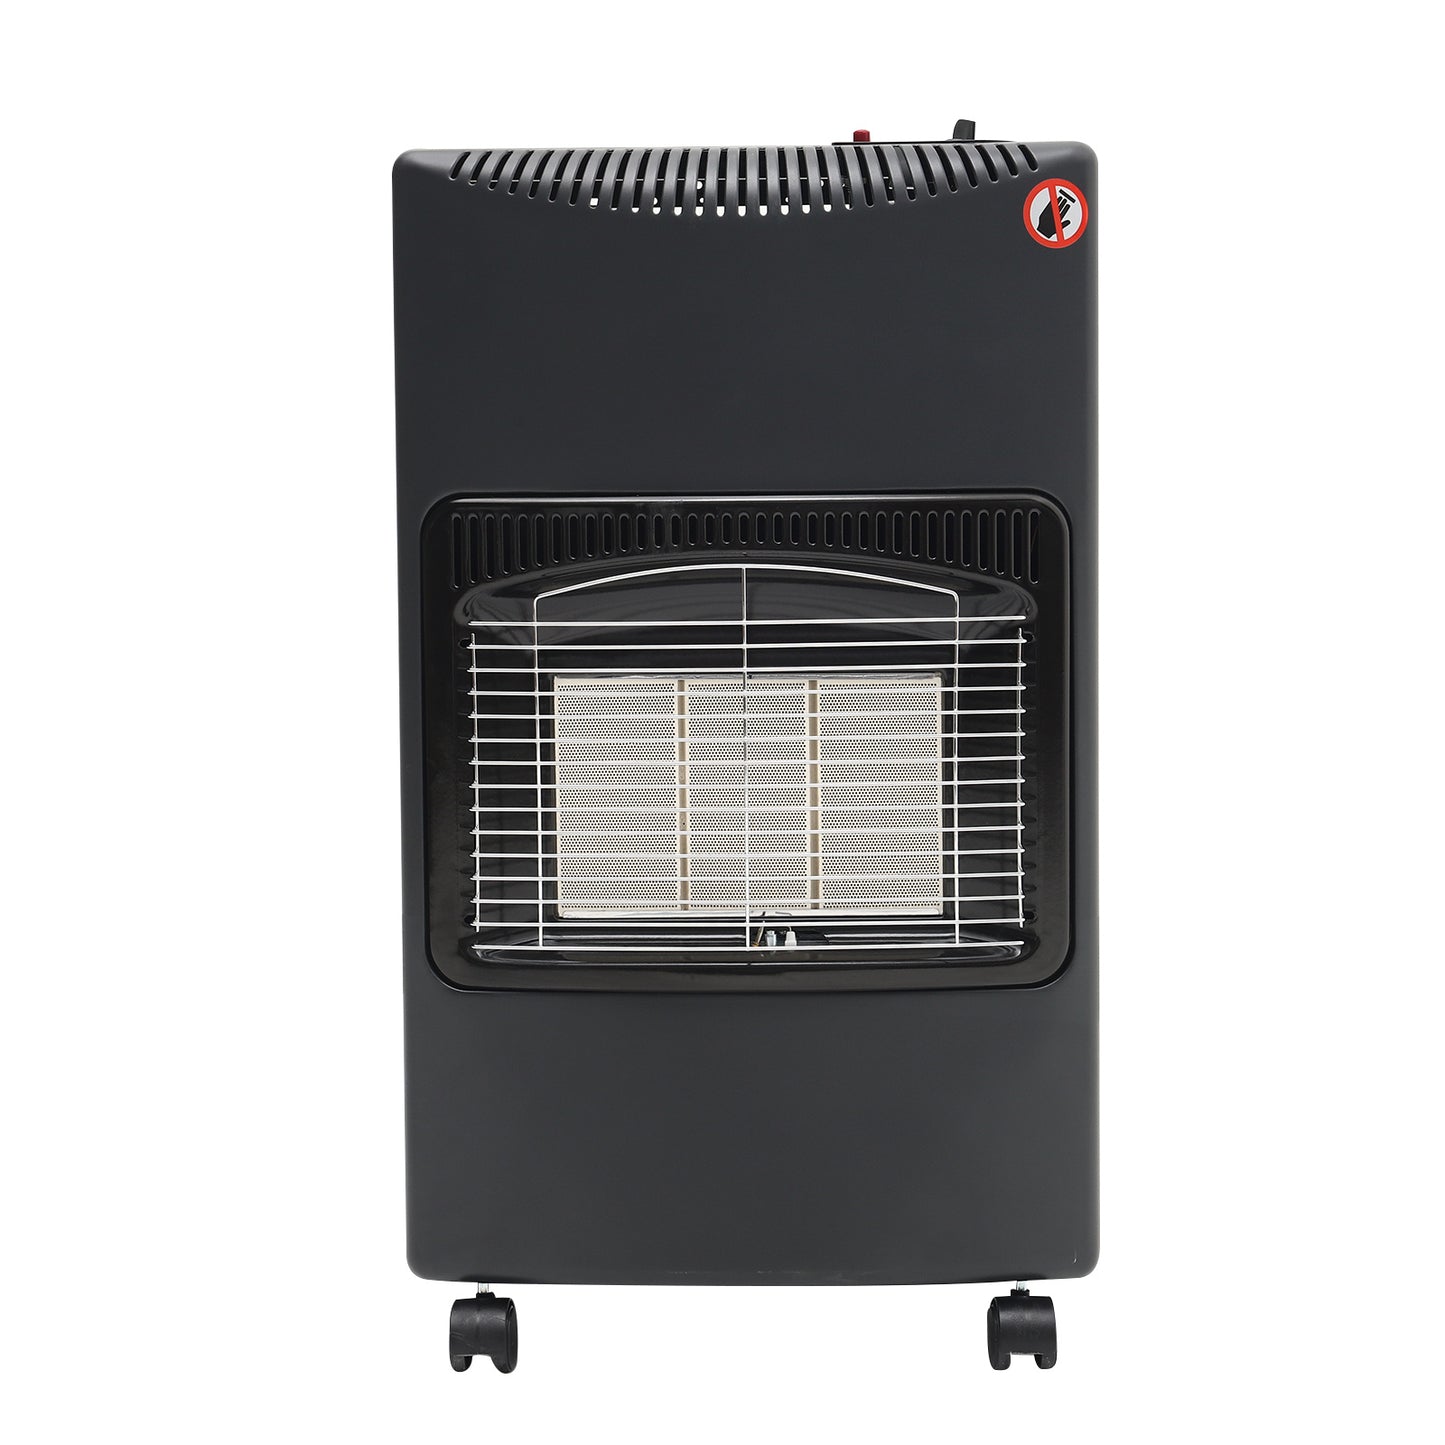 Ceramic Gas Heater with Wheels for Indoor and Outdoor